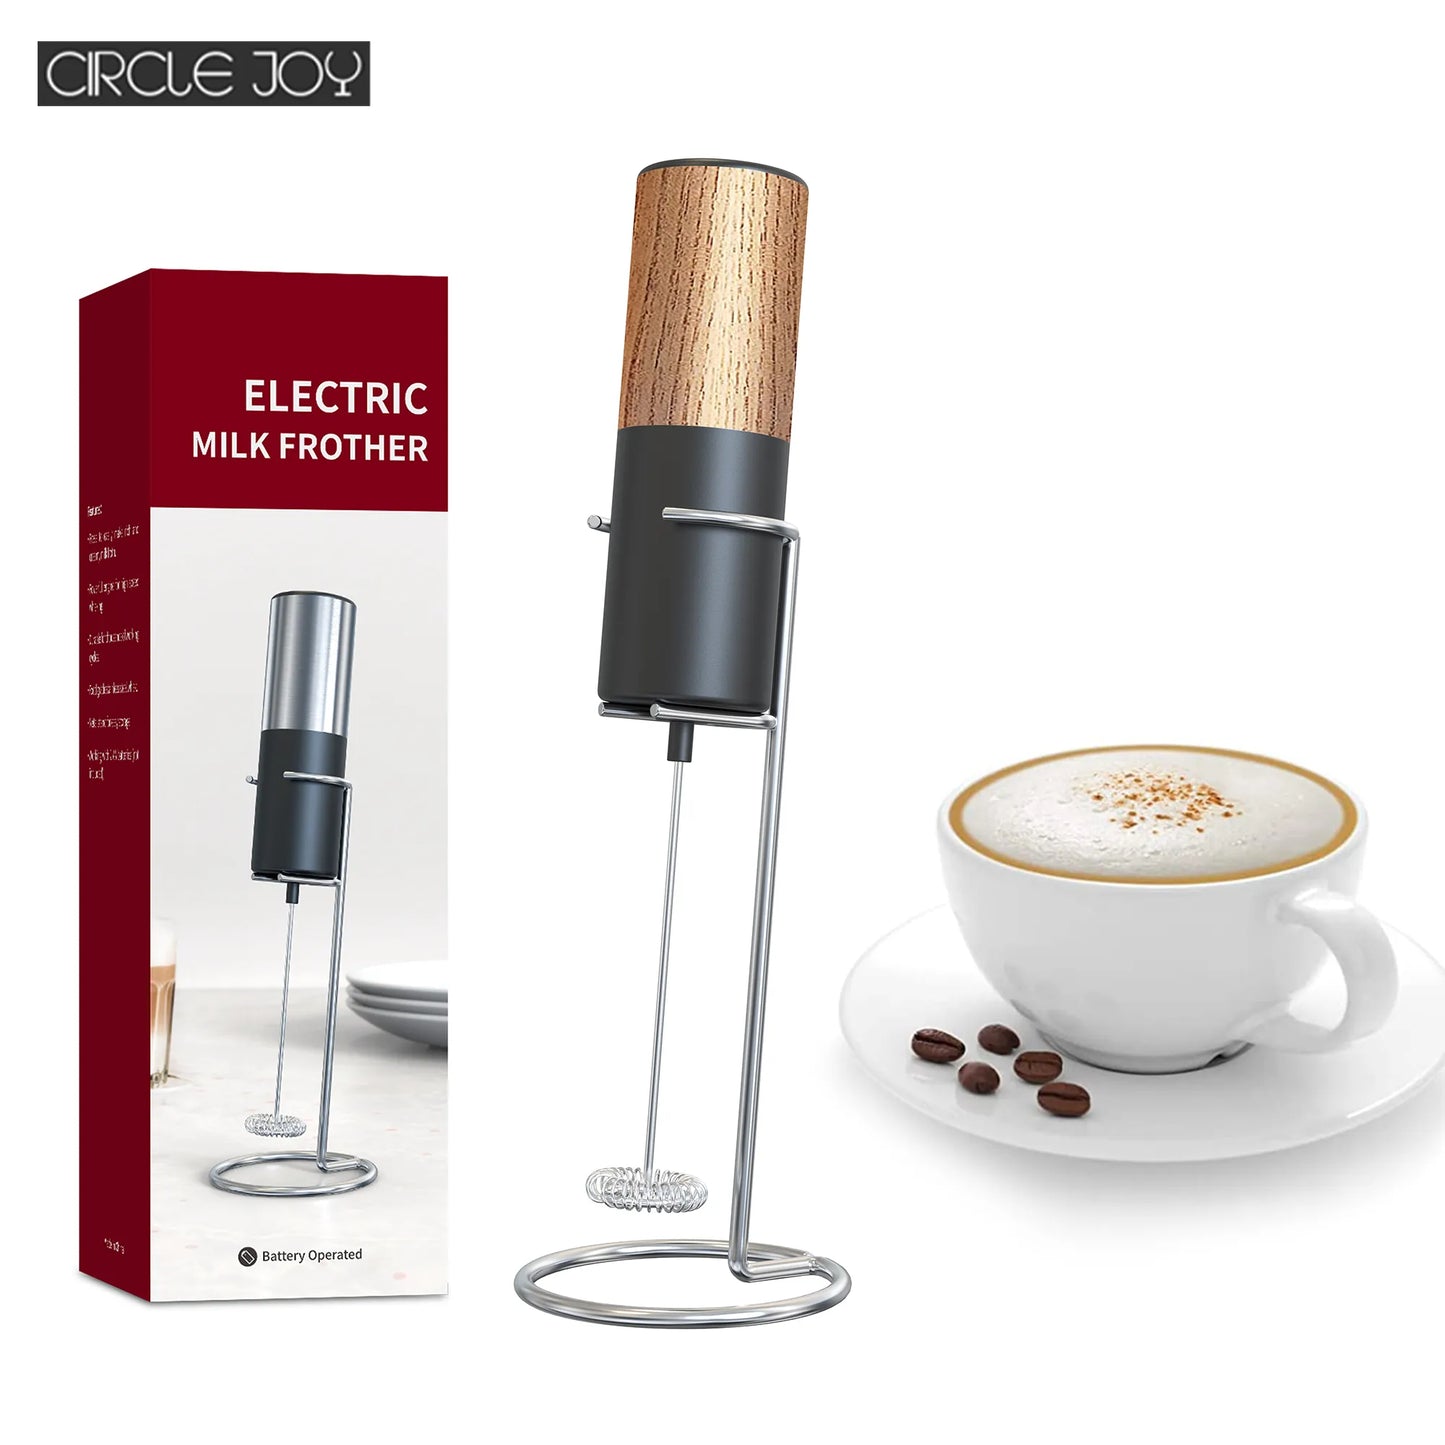 Circle joy Electric Milk Frother Mini Foamer Coffee Maker Egg Beater for Chocolate Cappuccino Stirrer Portable Blender